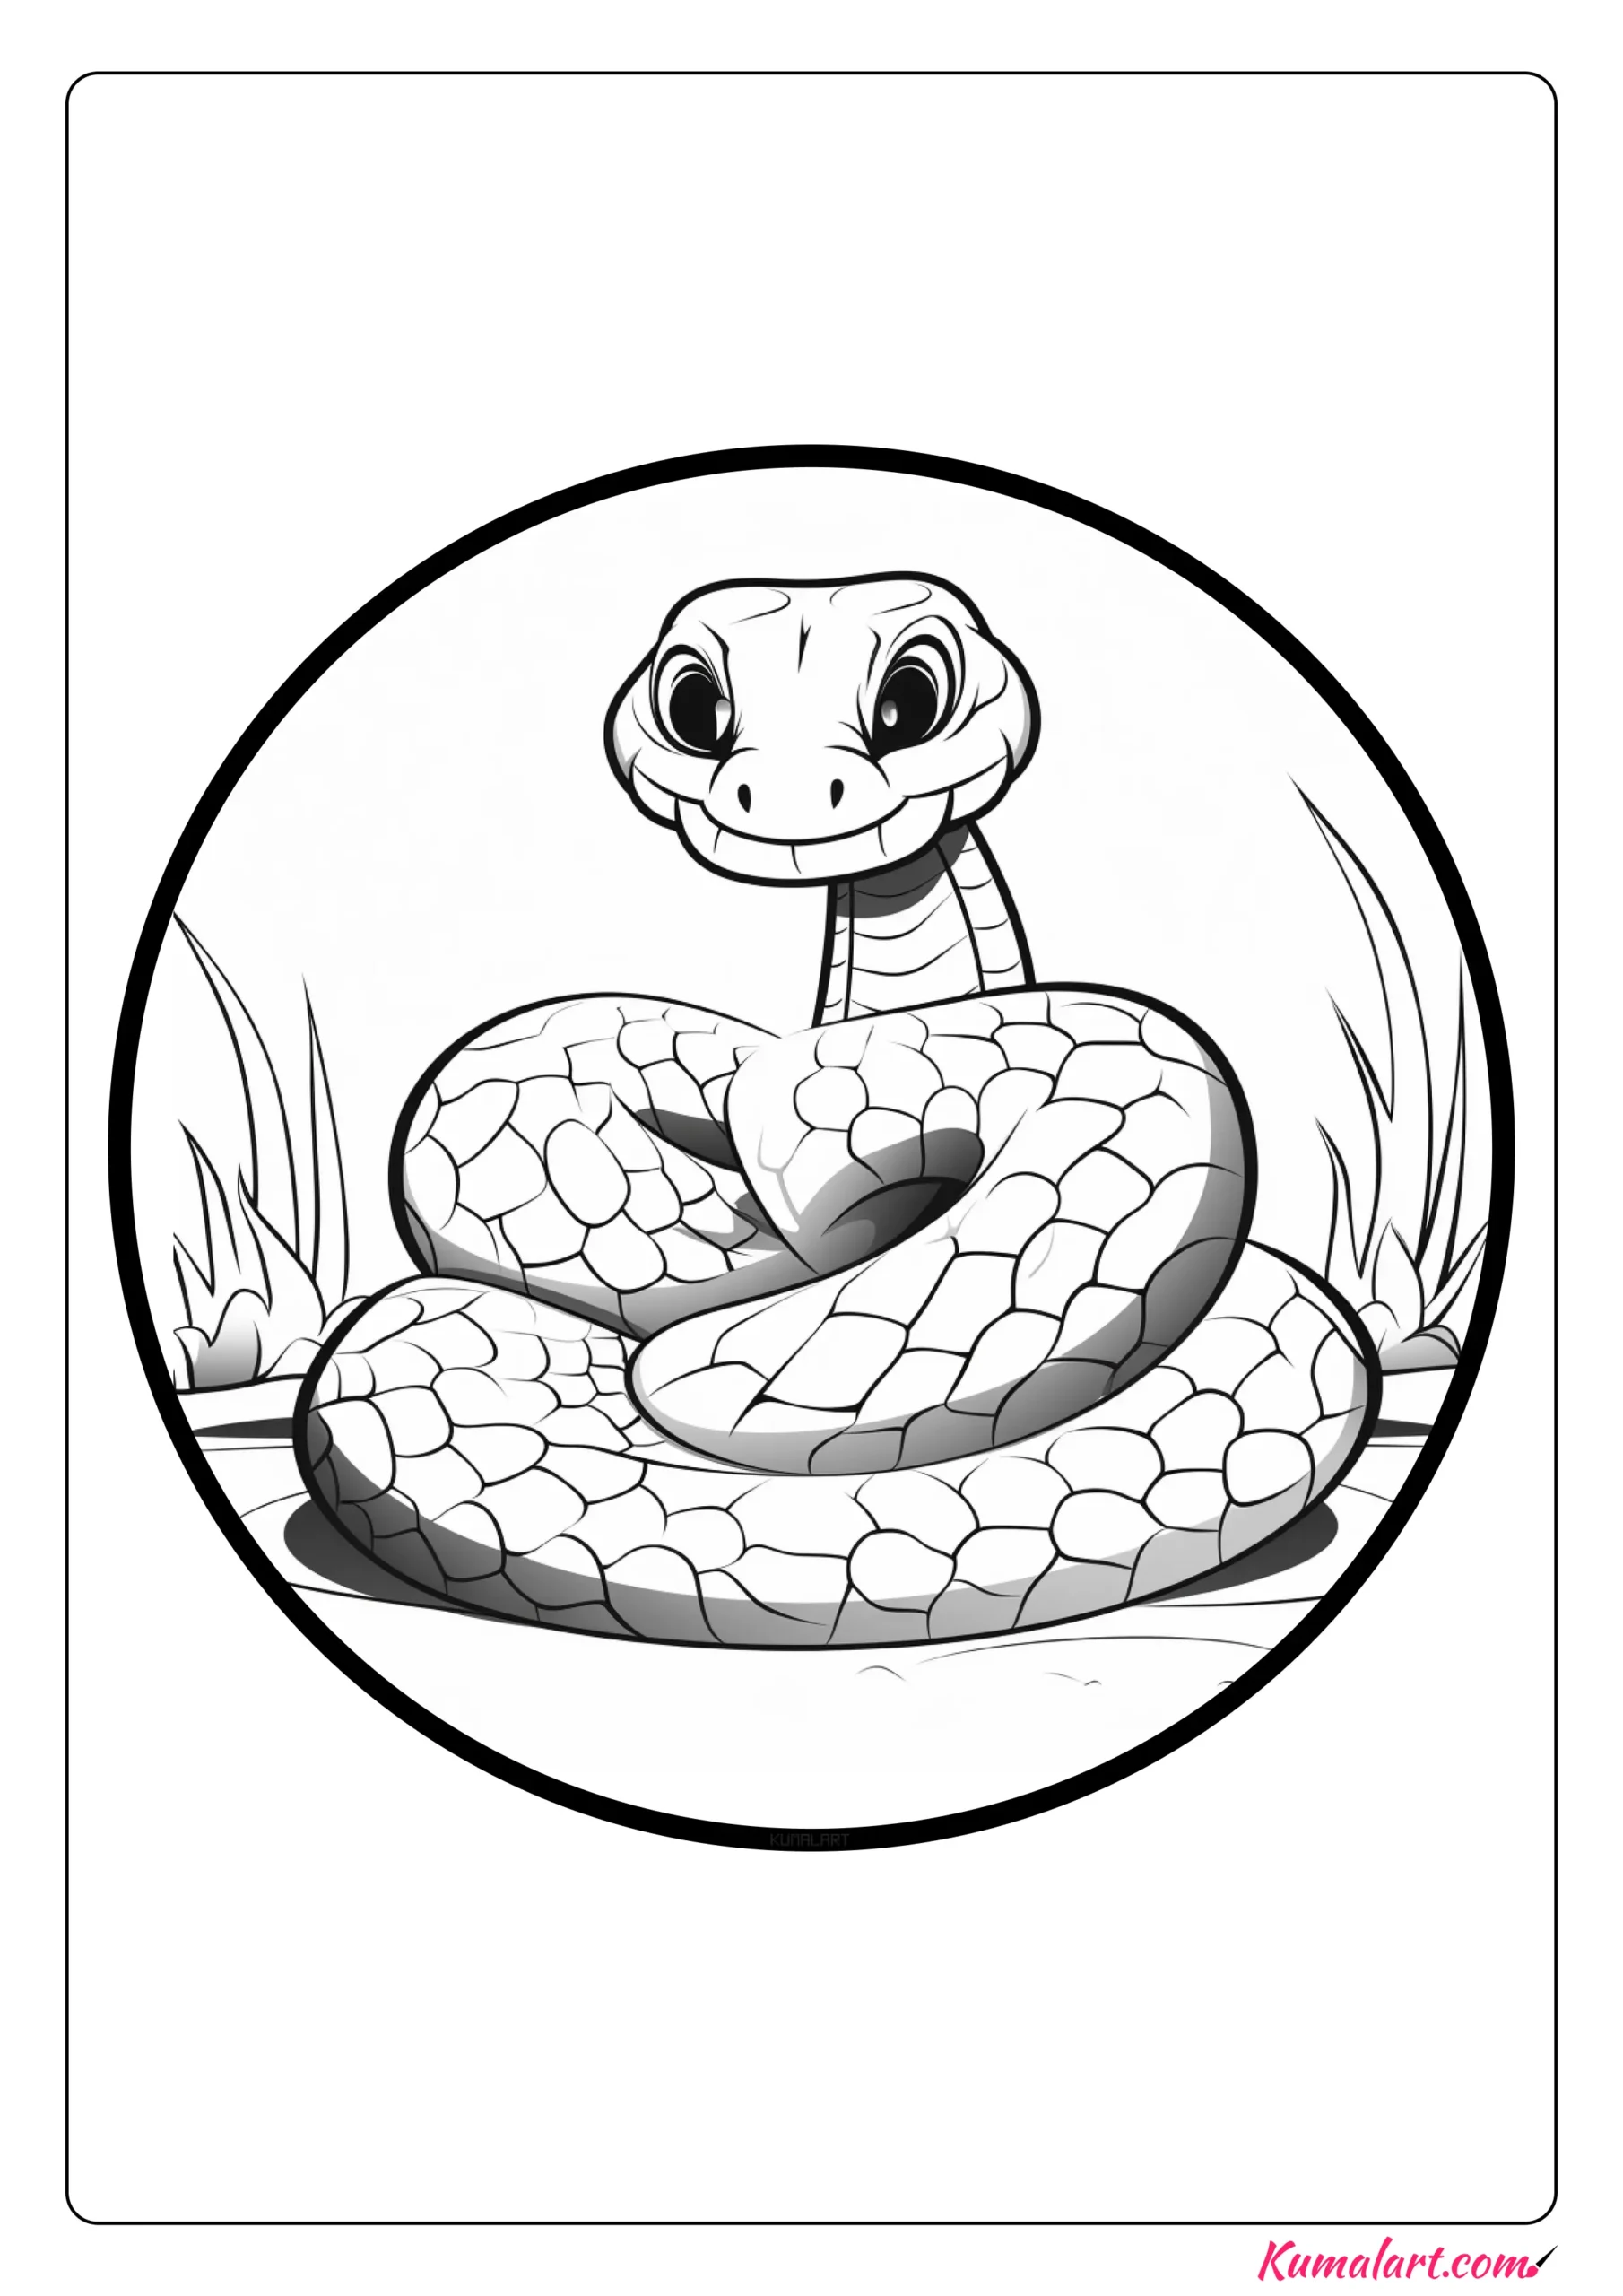 Baded Rock Rattle Snake Coloring Page